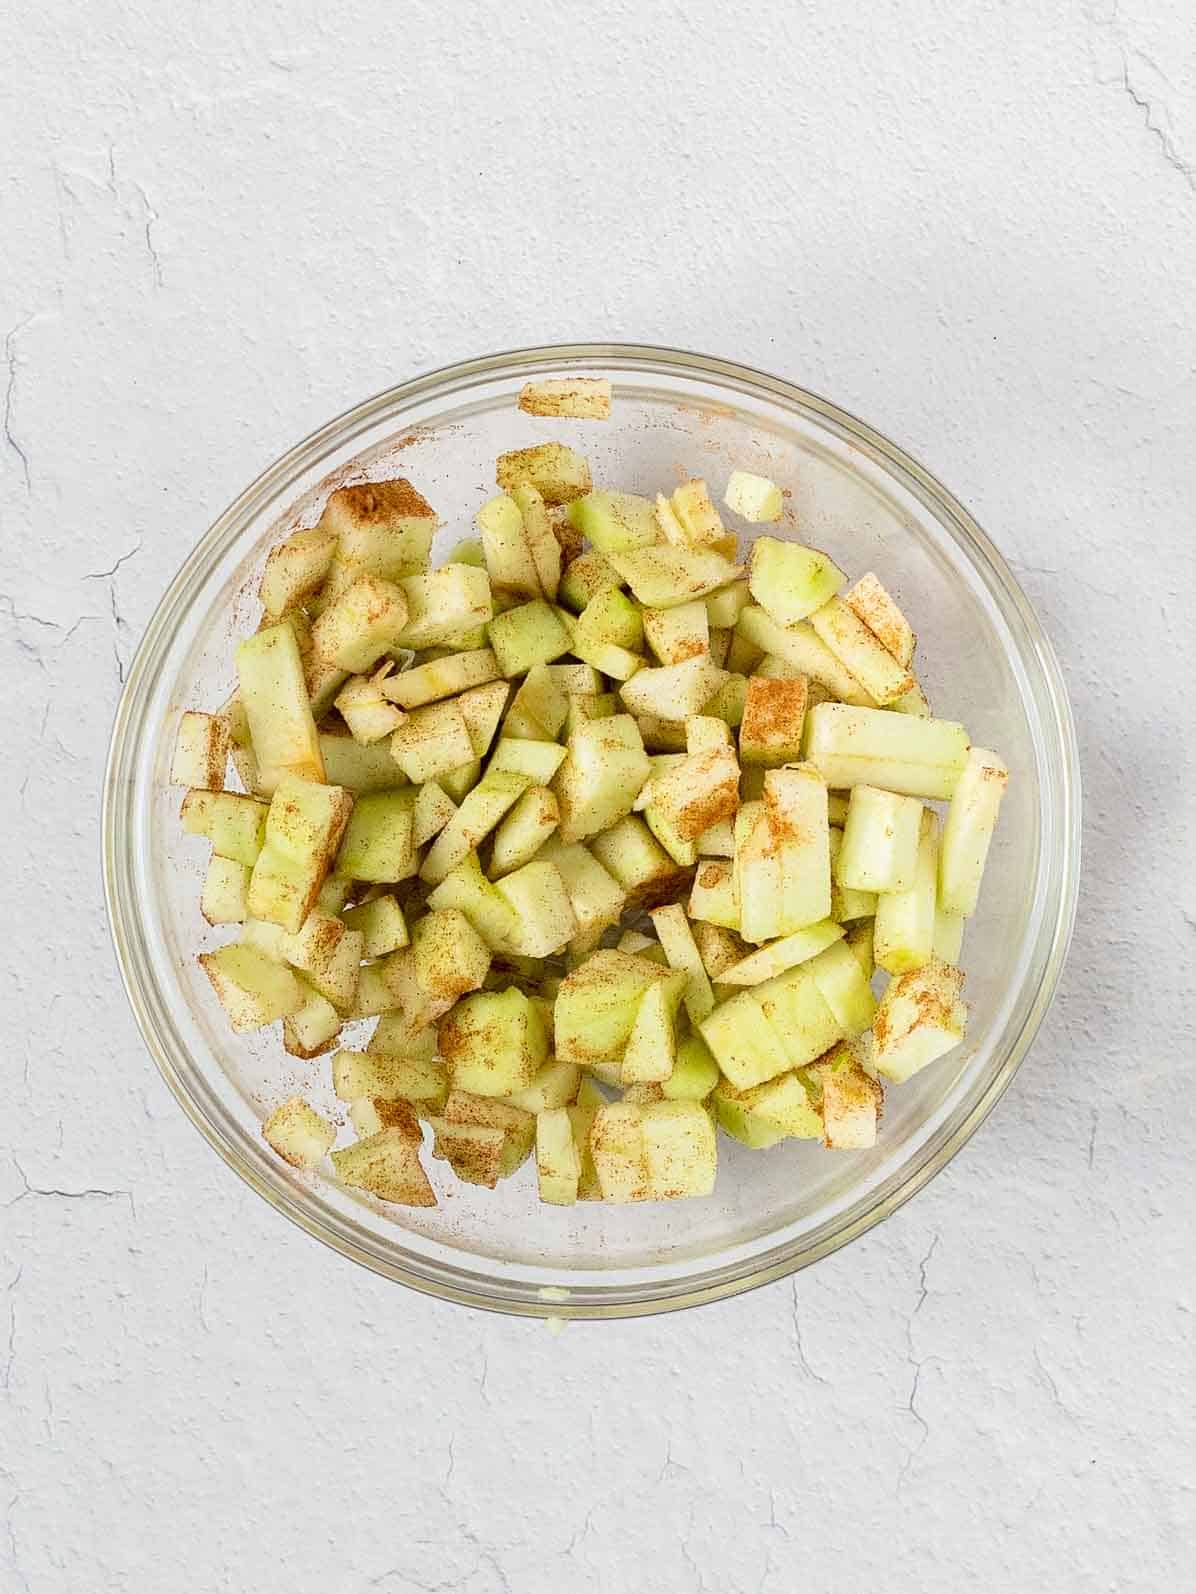 small cubed pieces of green apple sprinkled with cinnamon, in a bowl.